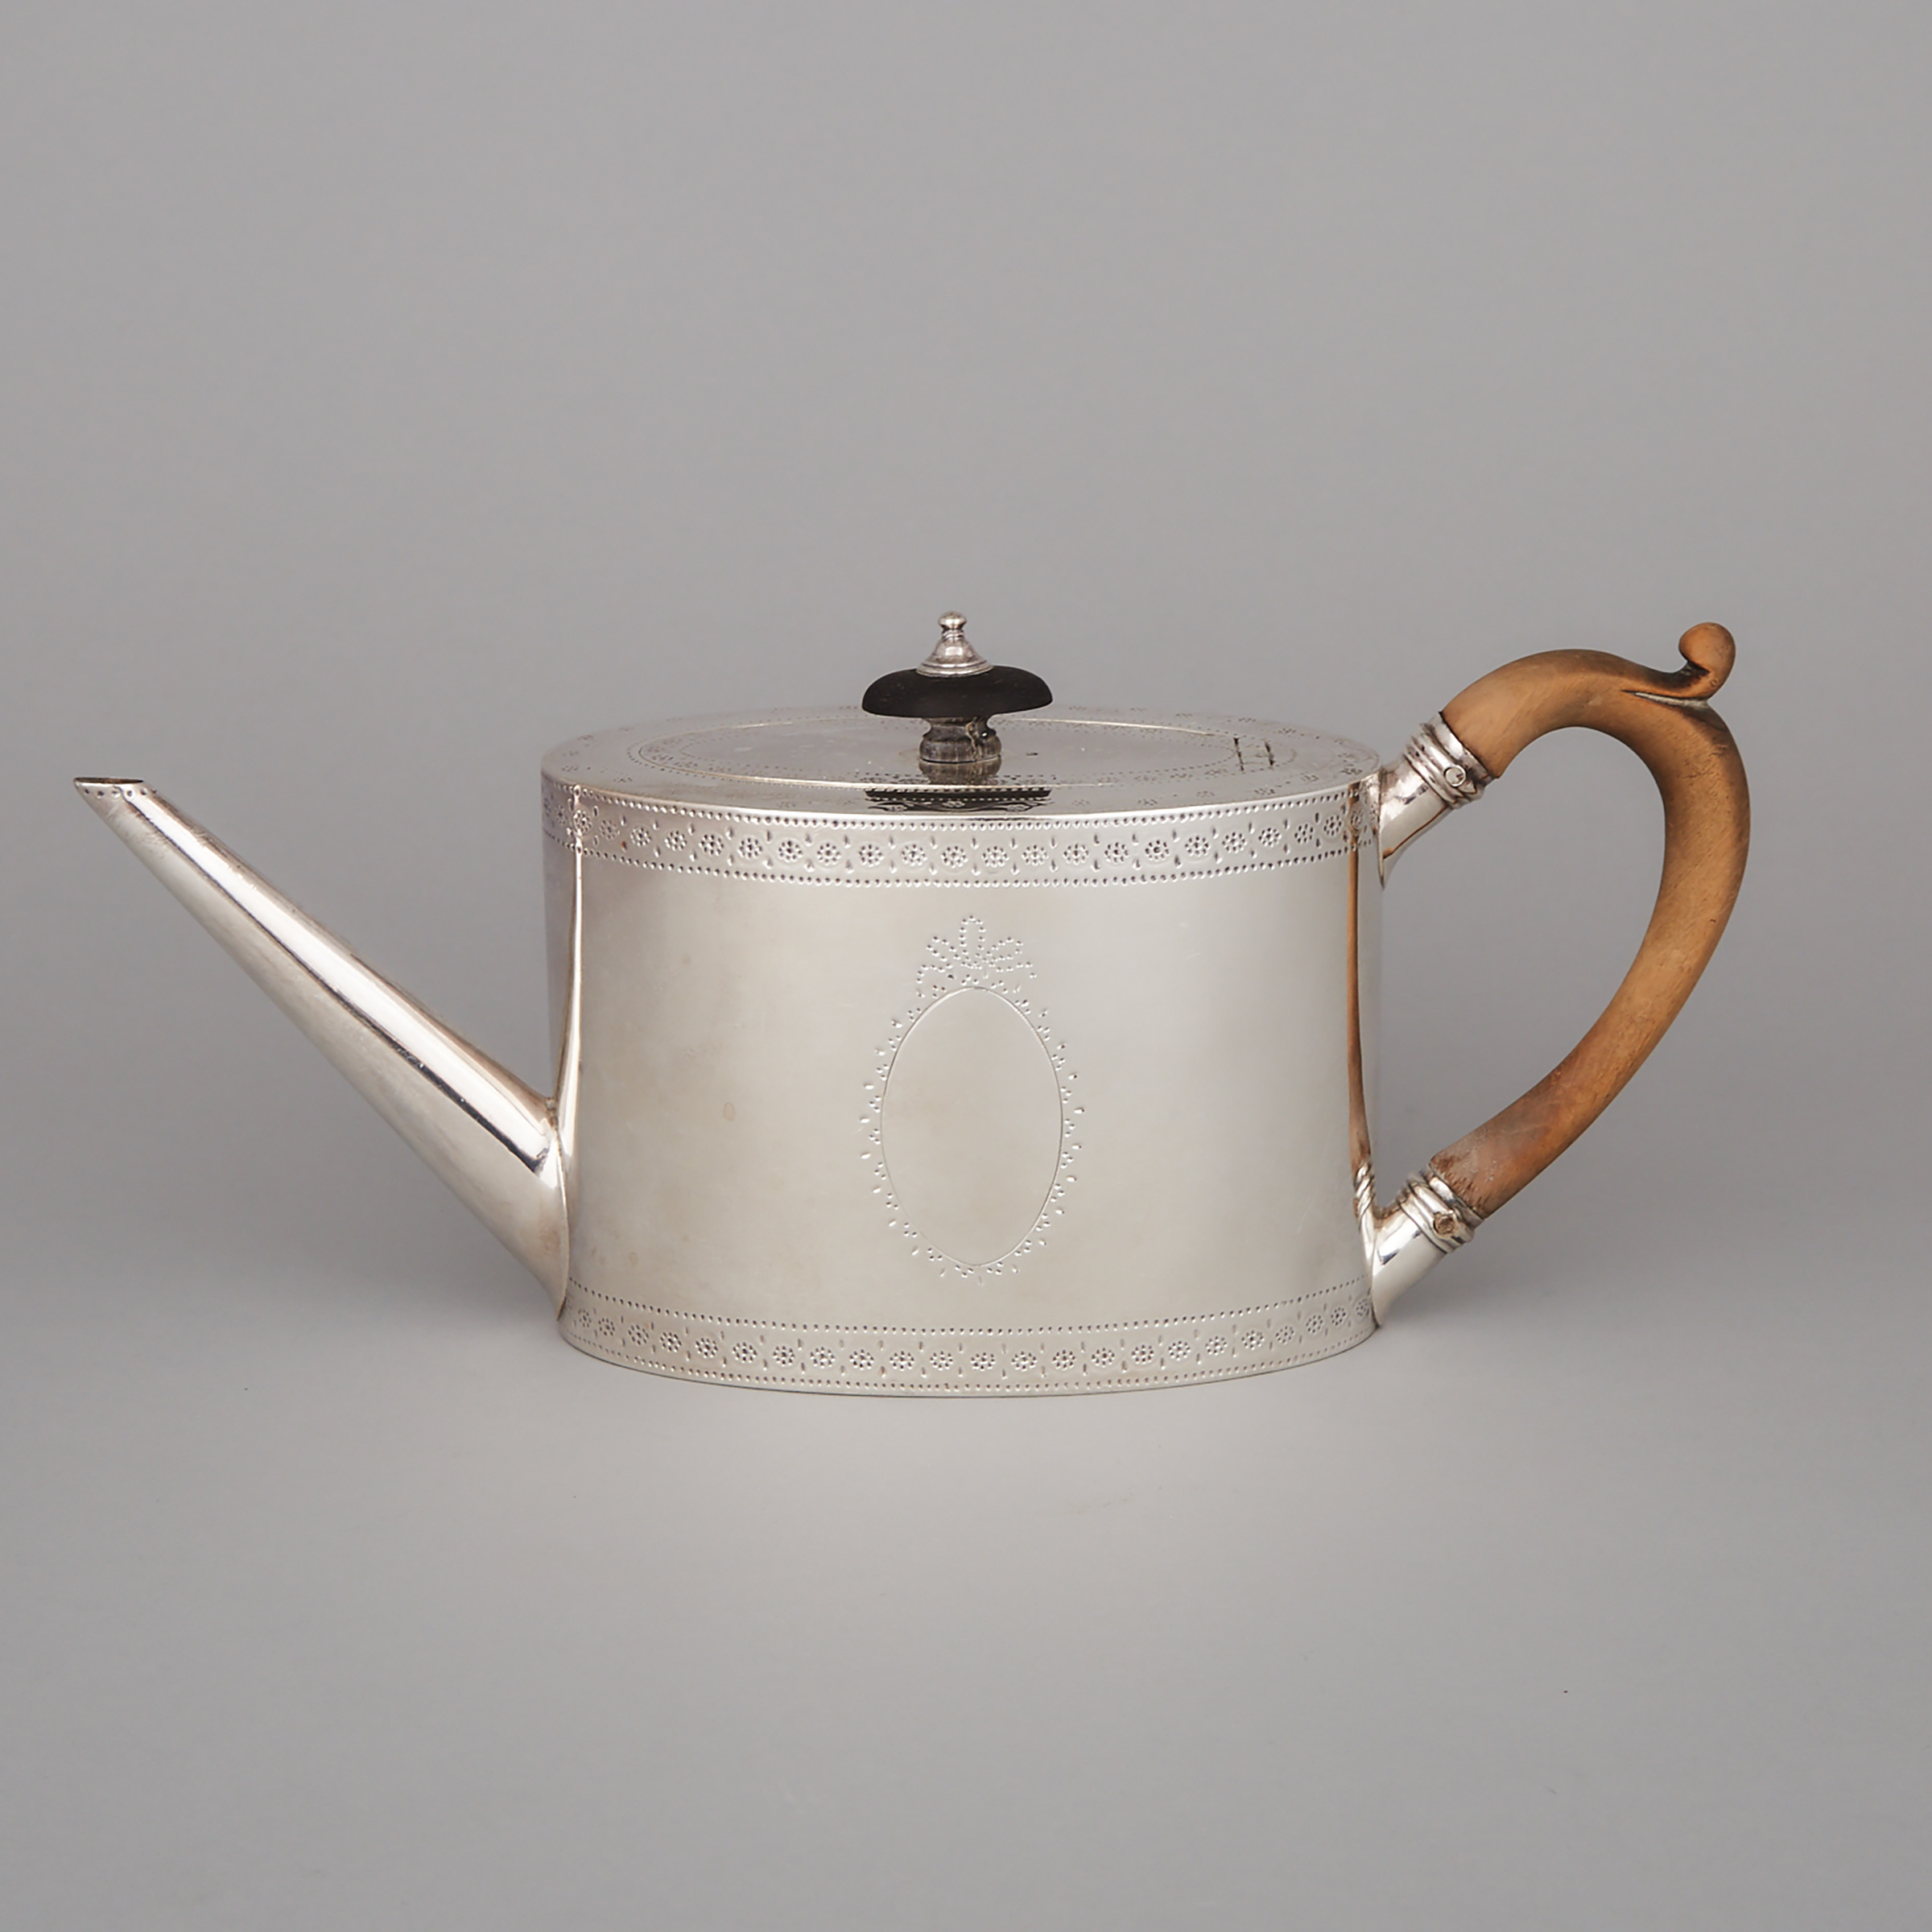 George III Silver Teapot, James Young, London, 1782